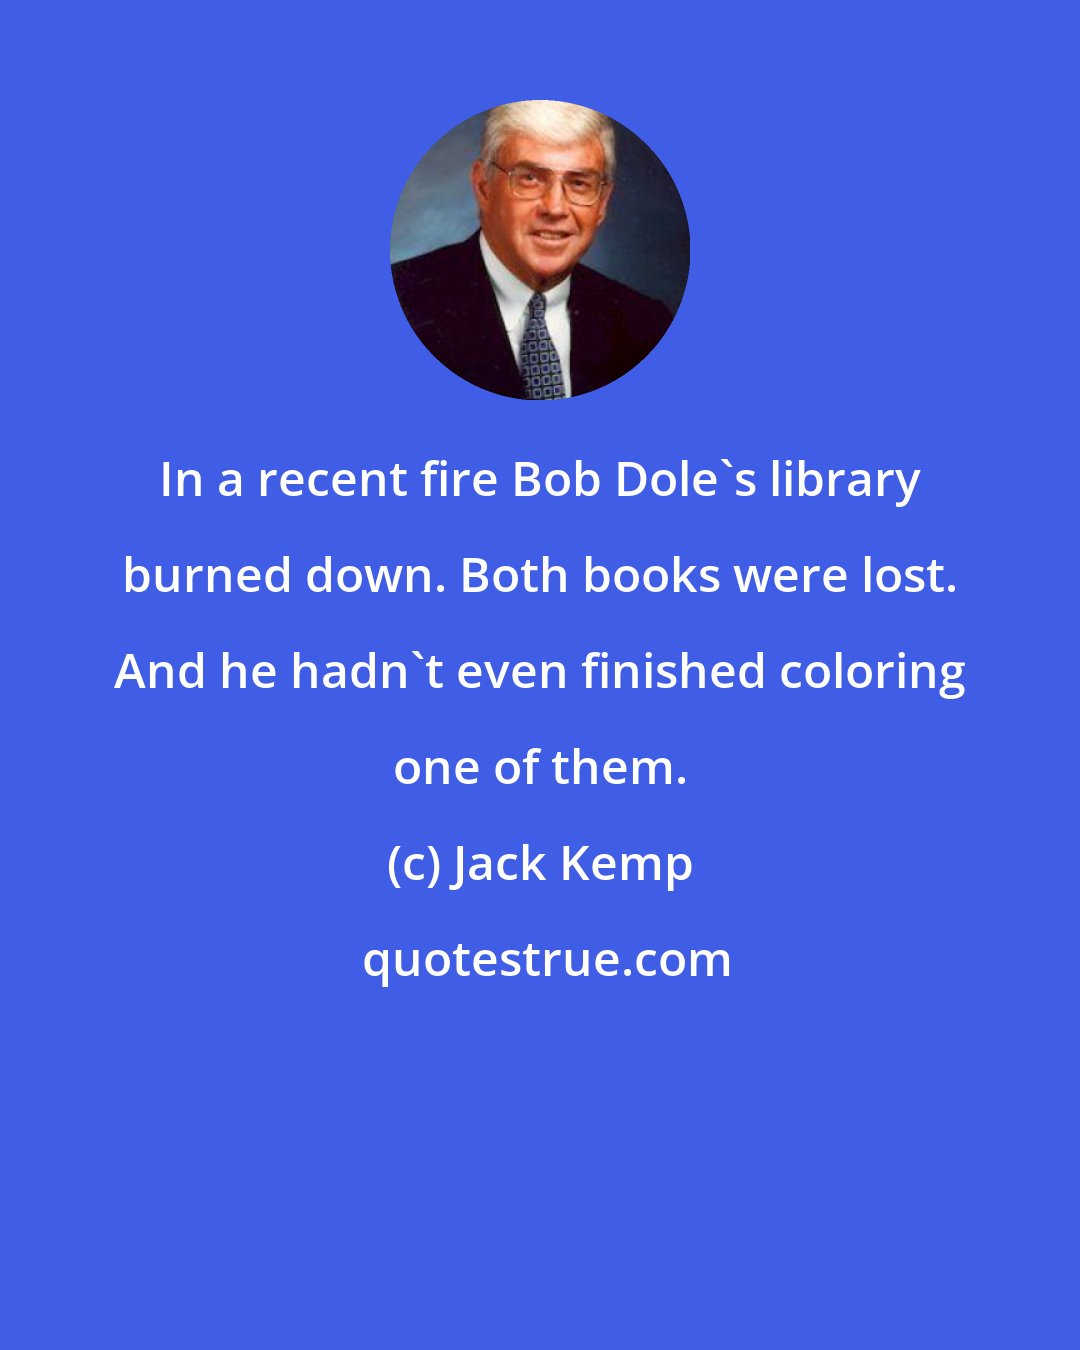 Jack Kemp: In a recent fire Bob Dole's library burned down. Both books were lost. And he hadn't even finished coloring one of them.